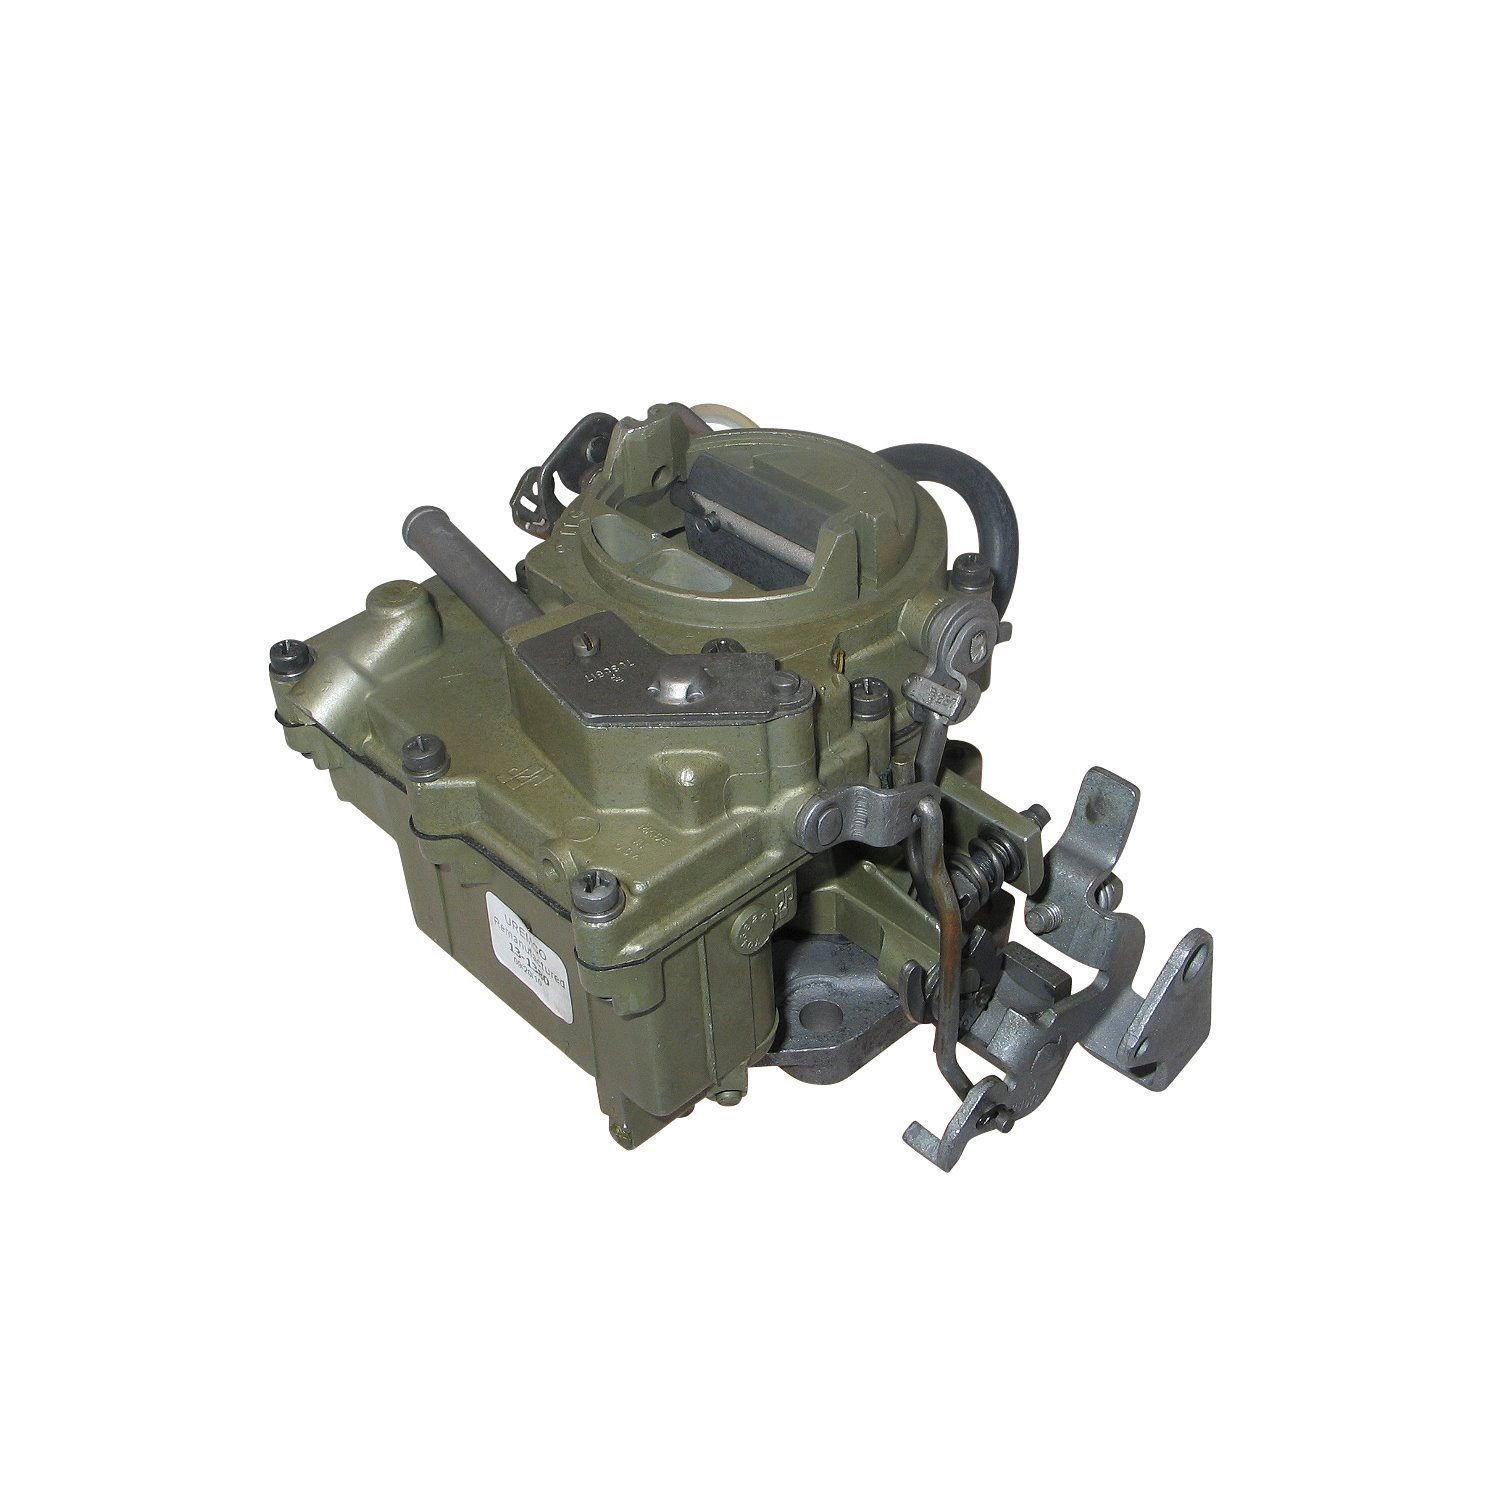 13-1380 Rochester Remanufactured Carburetor, 2GV-Style